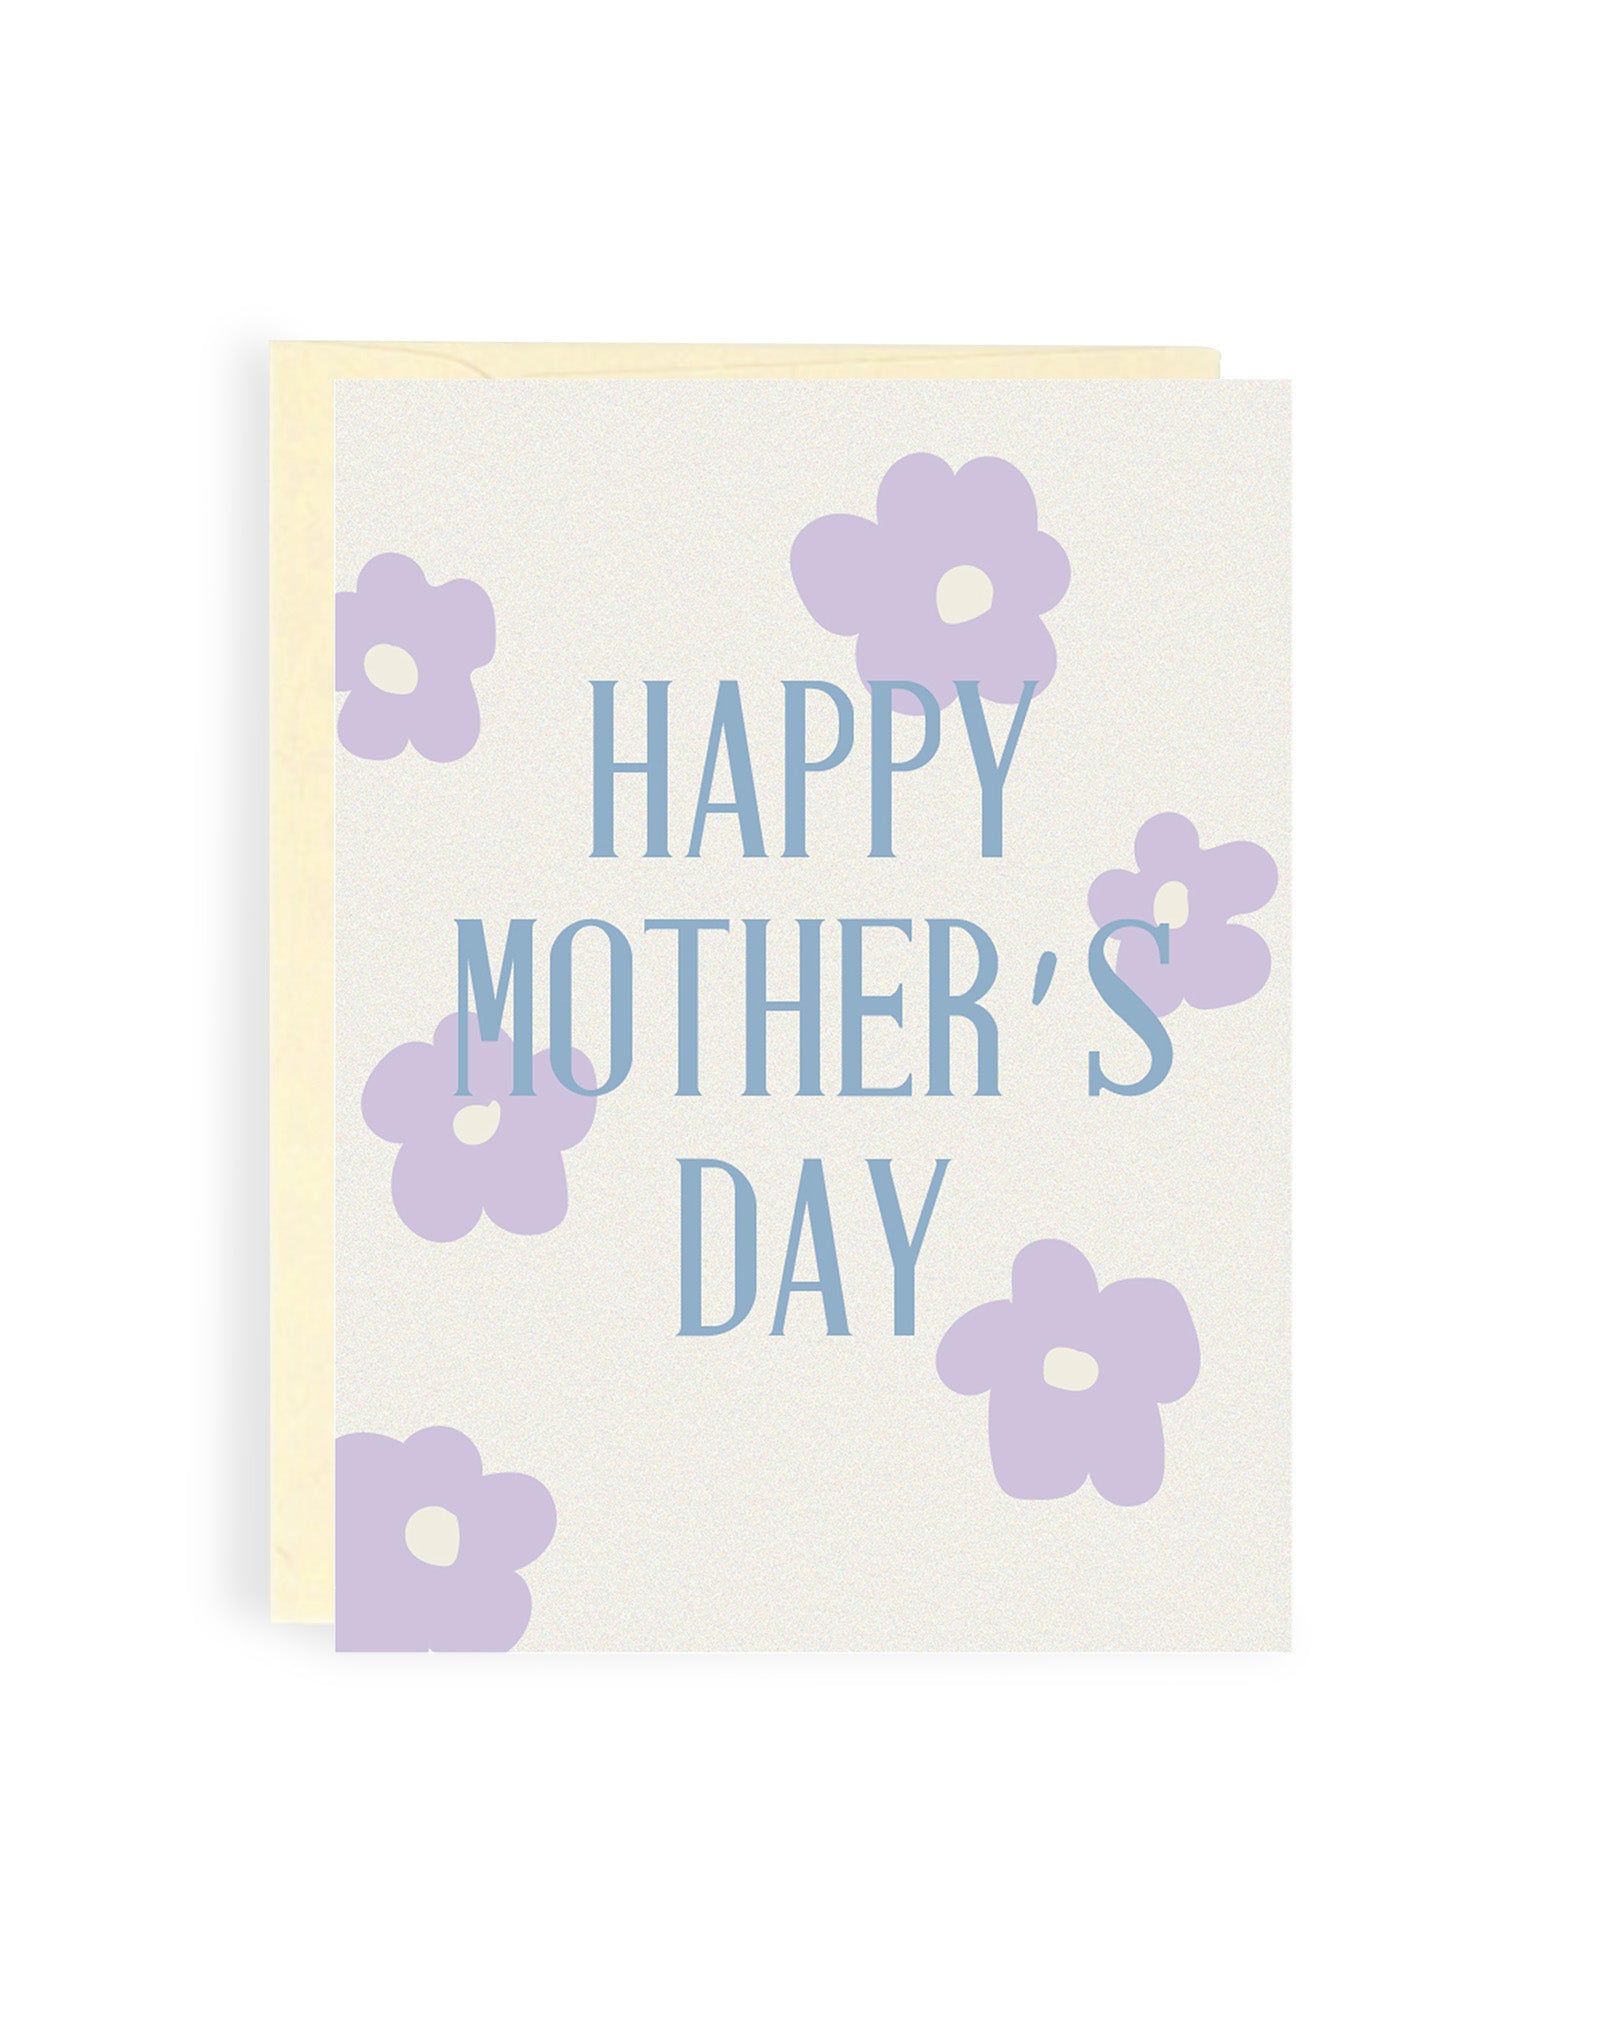 MOTHER'S DAY CARD - Lilac Flower